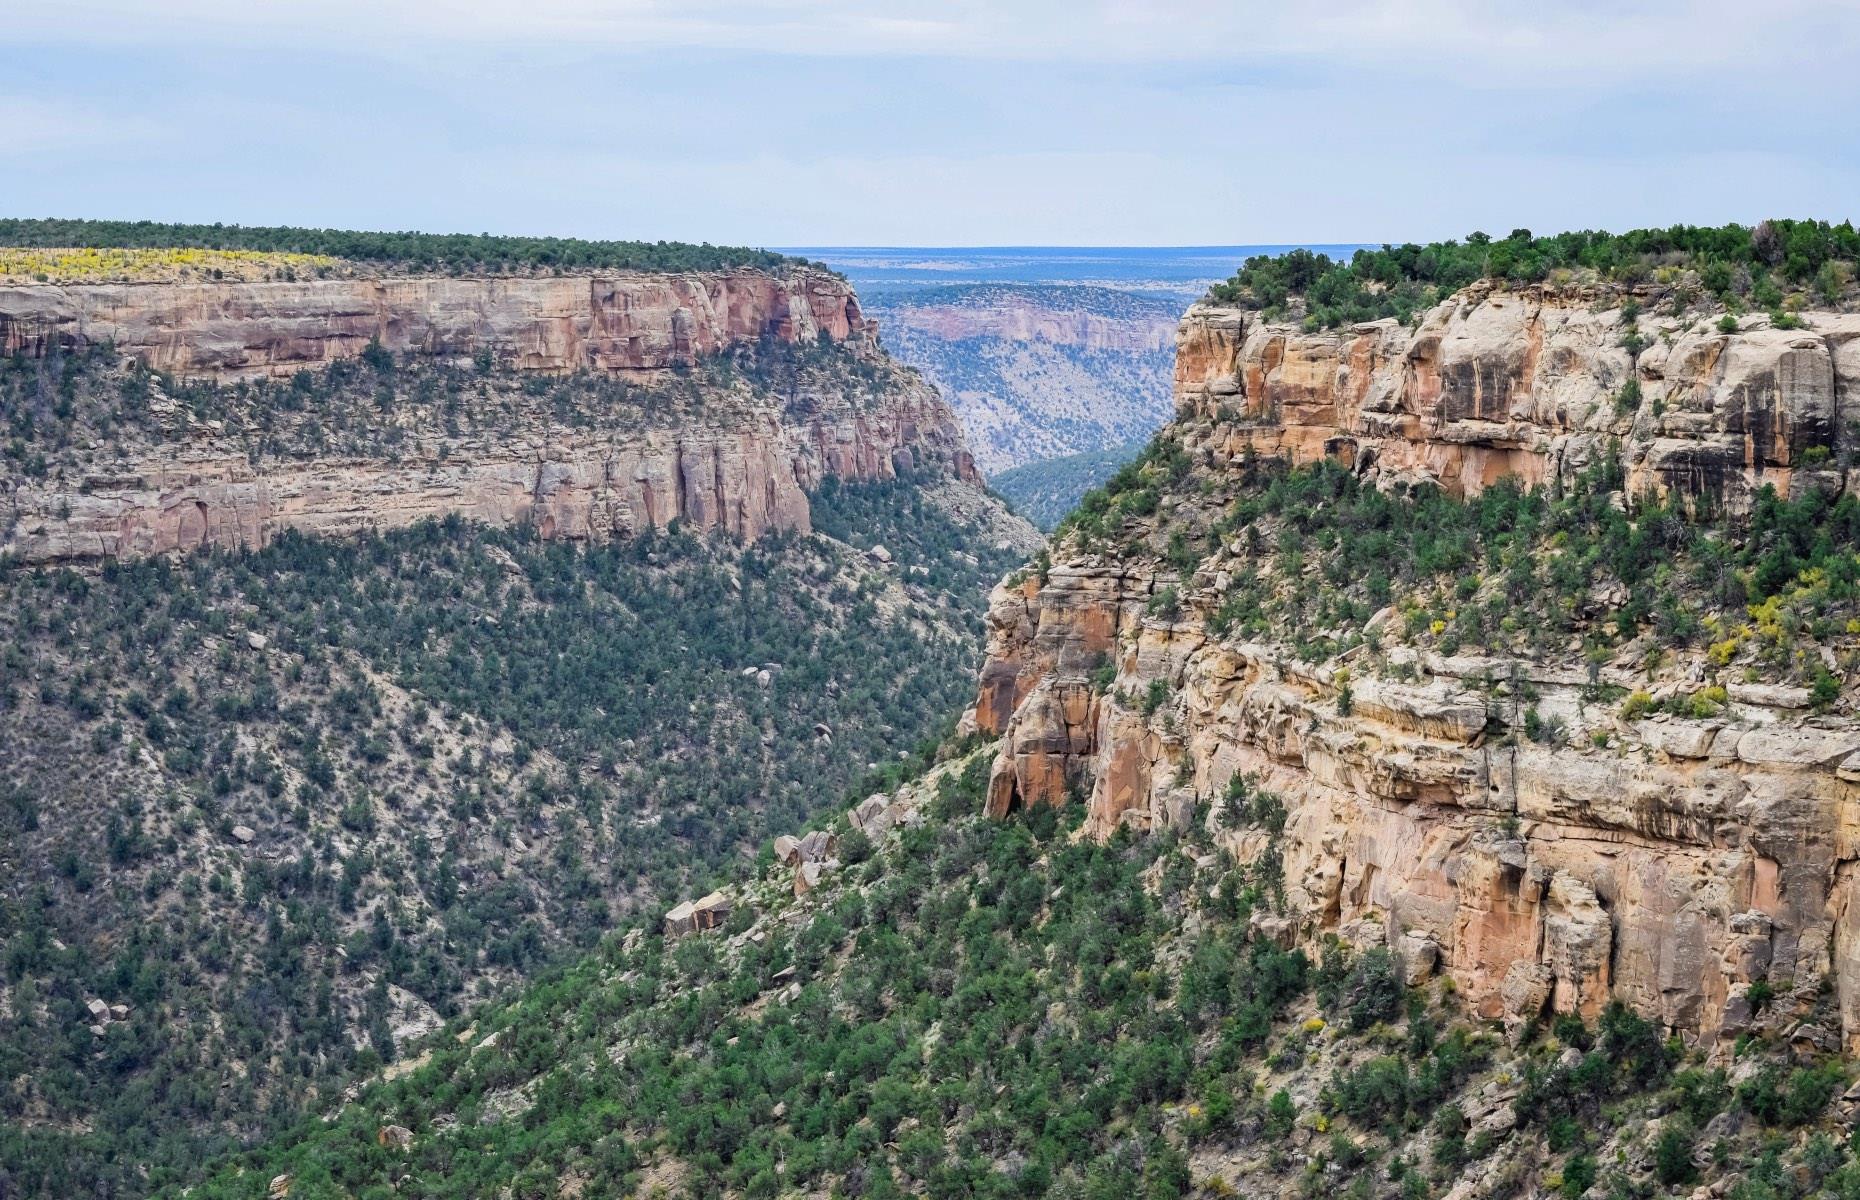 <p>Mesa Verde National Park sits at the top of an 8,570-foot-high (2,600m) sandstone plateau. To get to it, it's an exhilarating 20-mile (32km) uphill drive from the main highway, on a mountainous road featuring hairpin bends and sheer drops. It's worth navigating it, however, to drink in the far-reaching view over the verdant Mesa Verde and Four Corners region that greets you at the top.</p>  <p><a href="https://www.loveexploring.com/galleries/84907/jaw-dropping-pictures-of-the-worlds-most-dangerous-roads?page=1"><strong>Discover these jaw-dropping pictures of the world's most dangerous roads</strong></a></p>